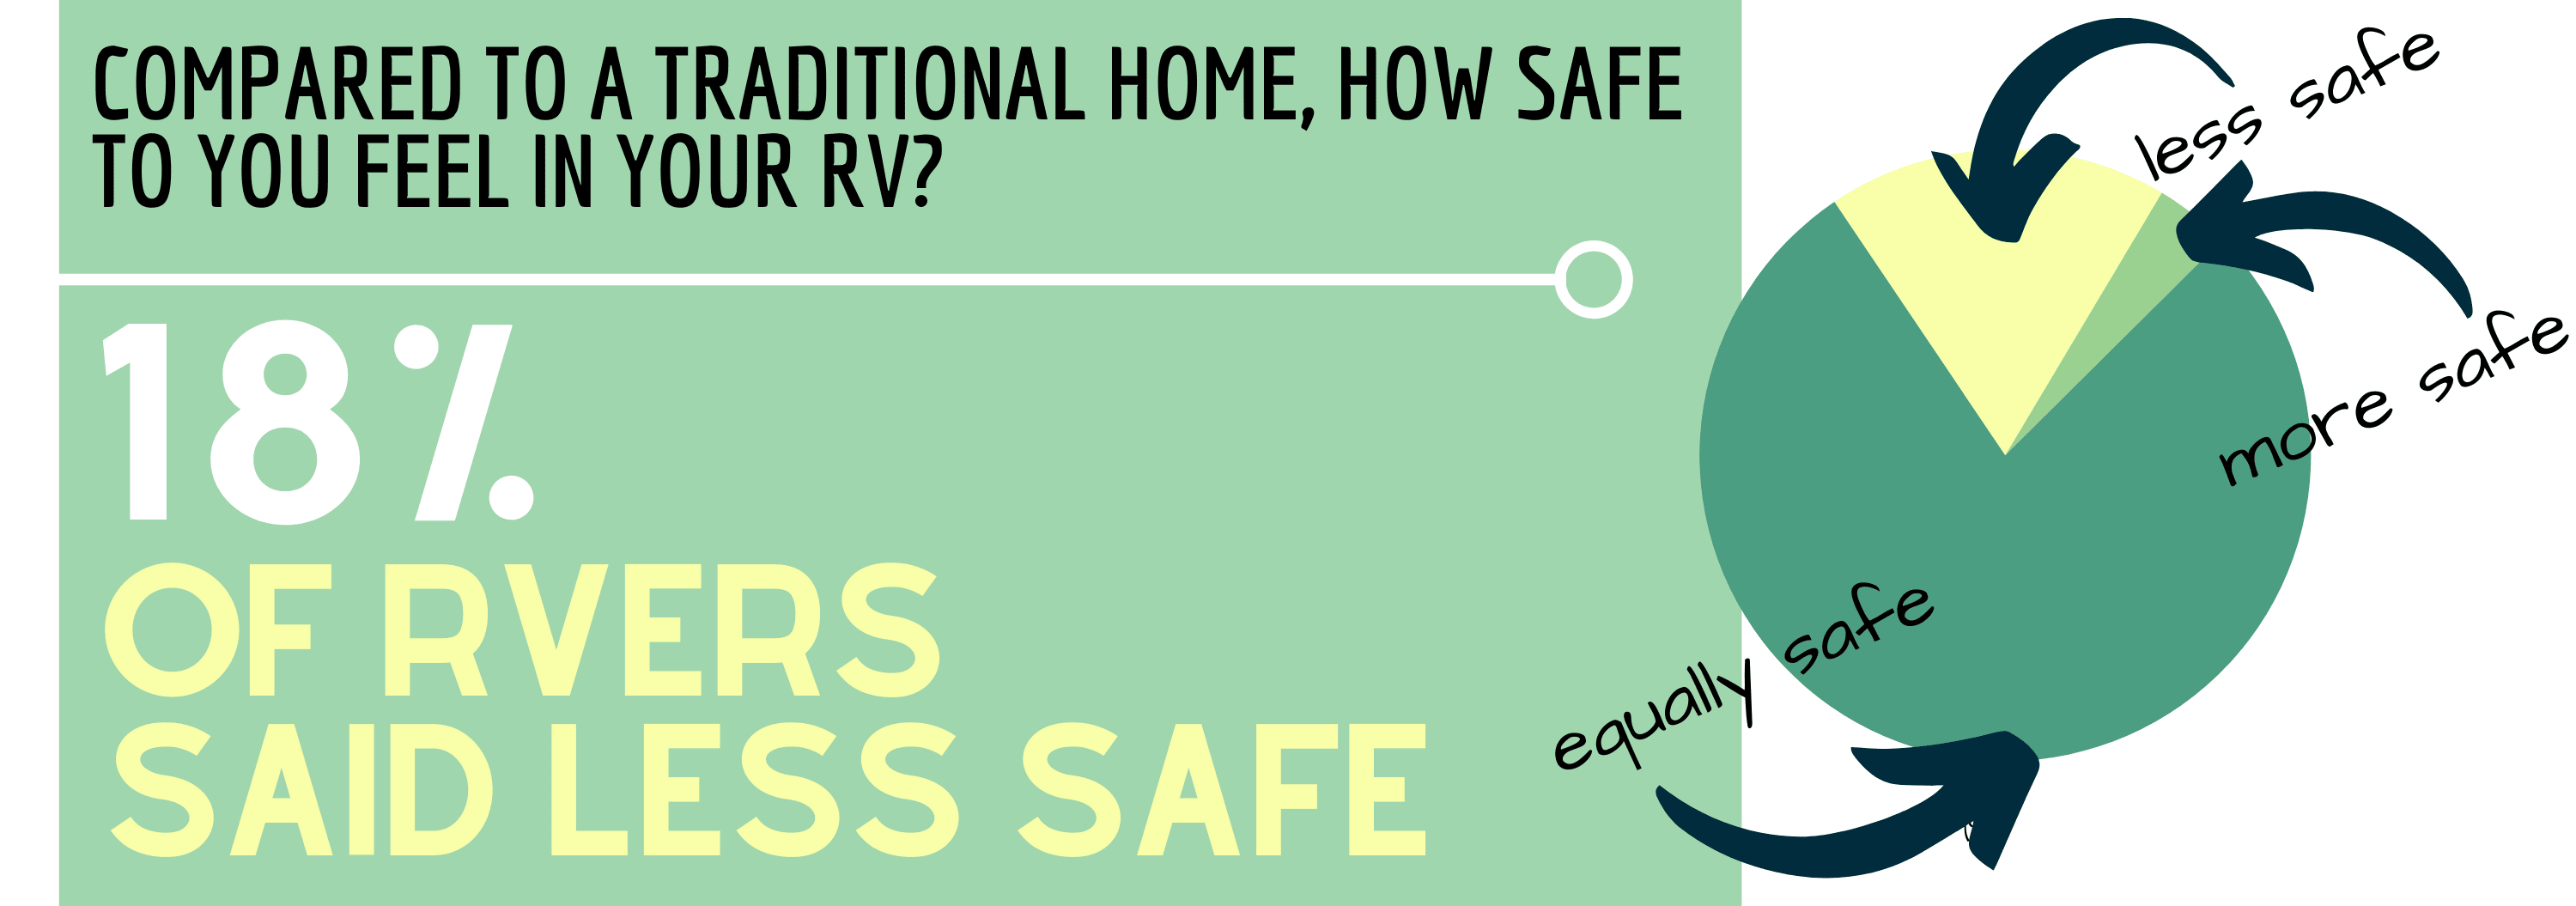 How safe do you feel in your rv?.png